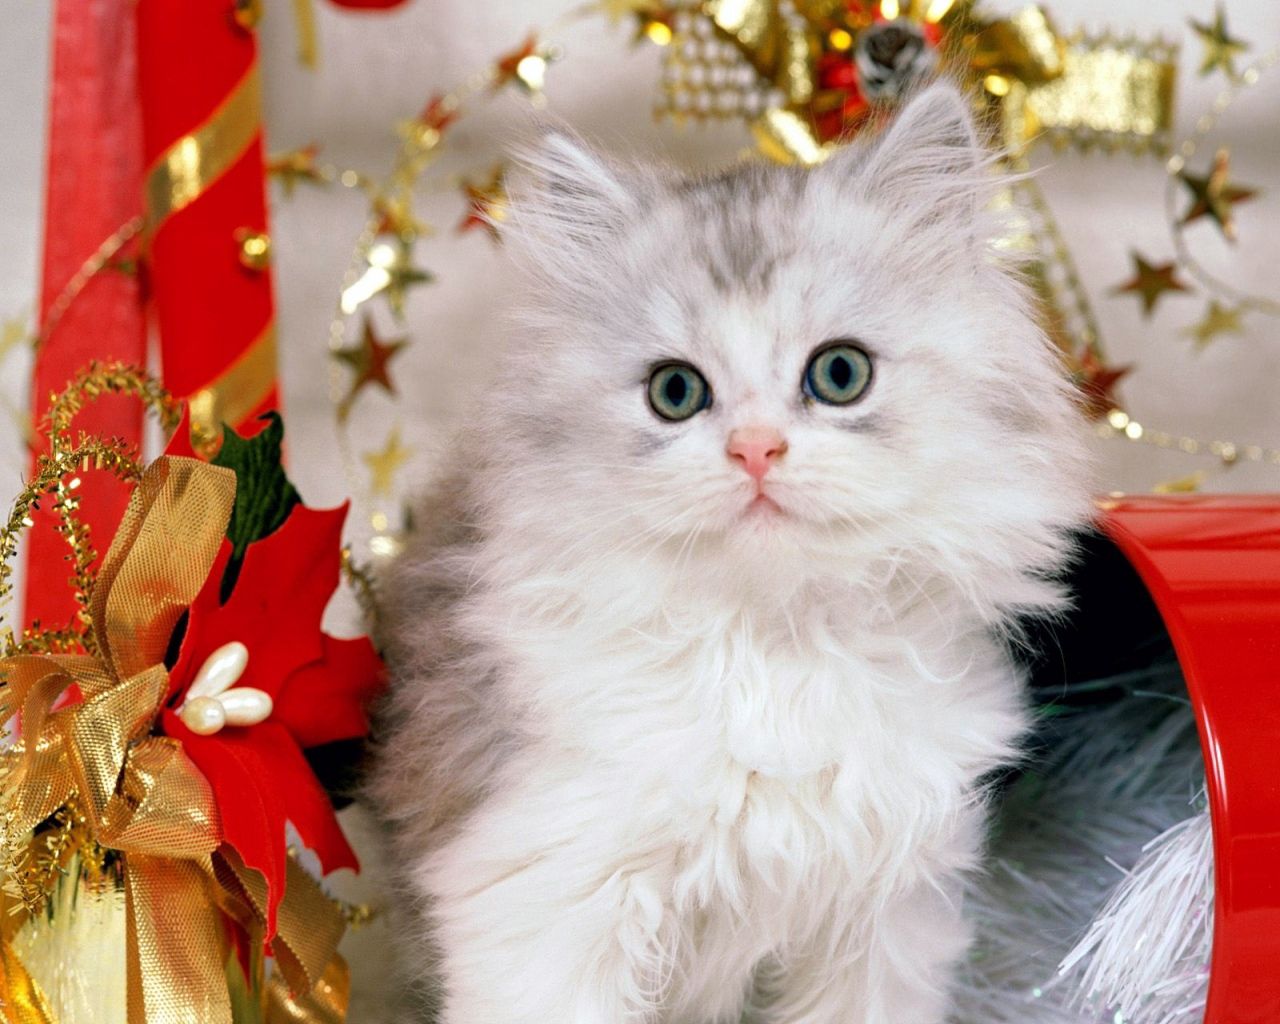 animals, new year, toys, cat, fluffy, bows, presents, gifts